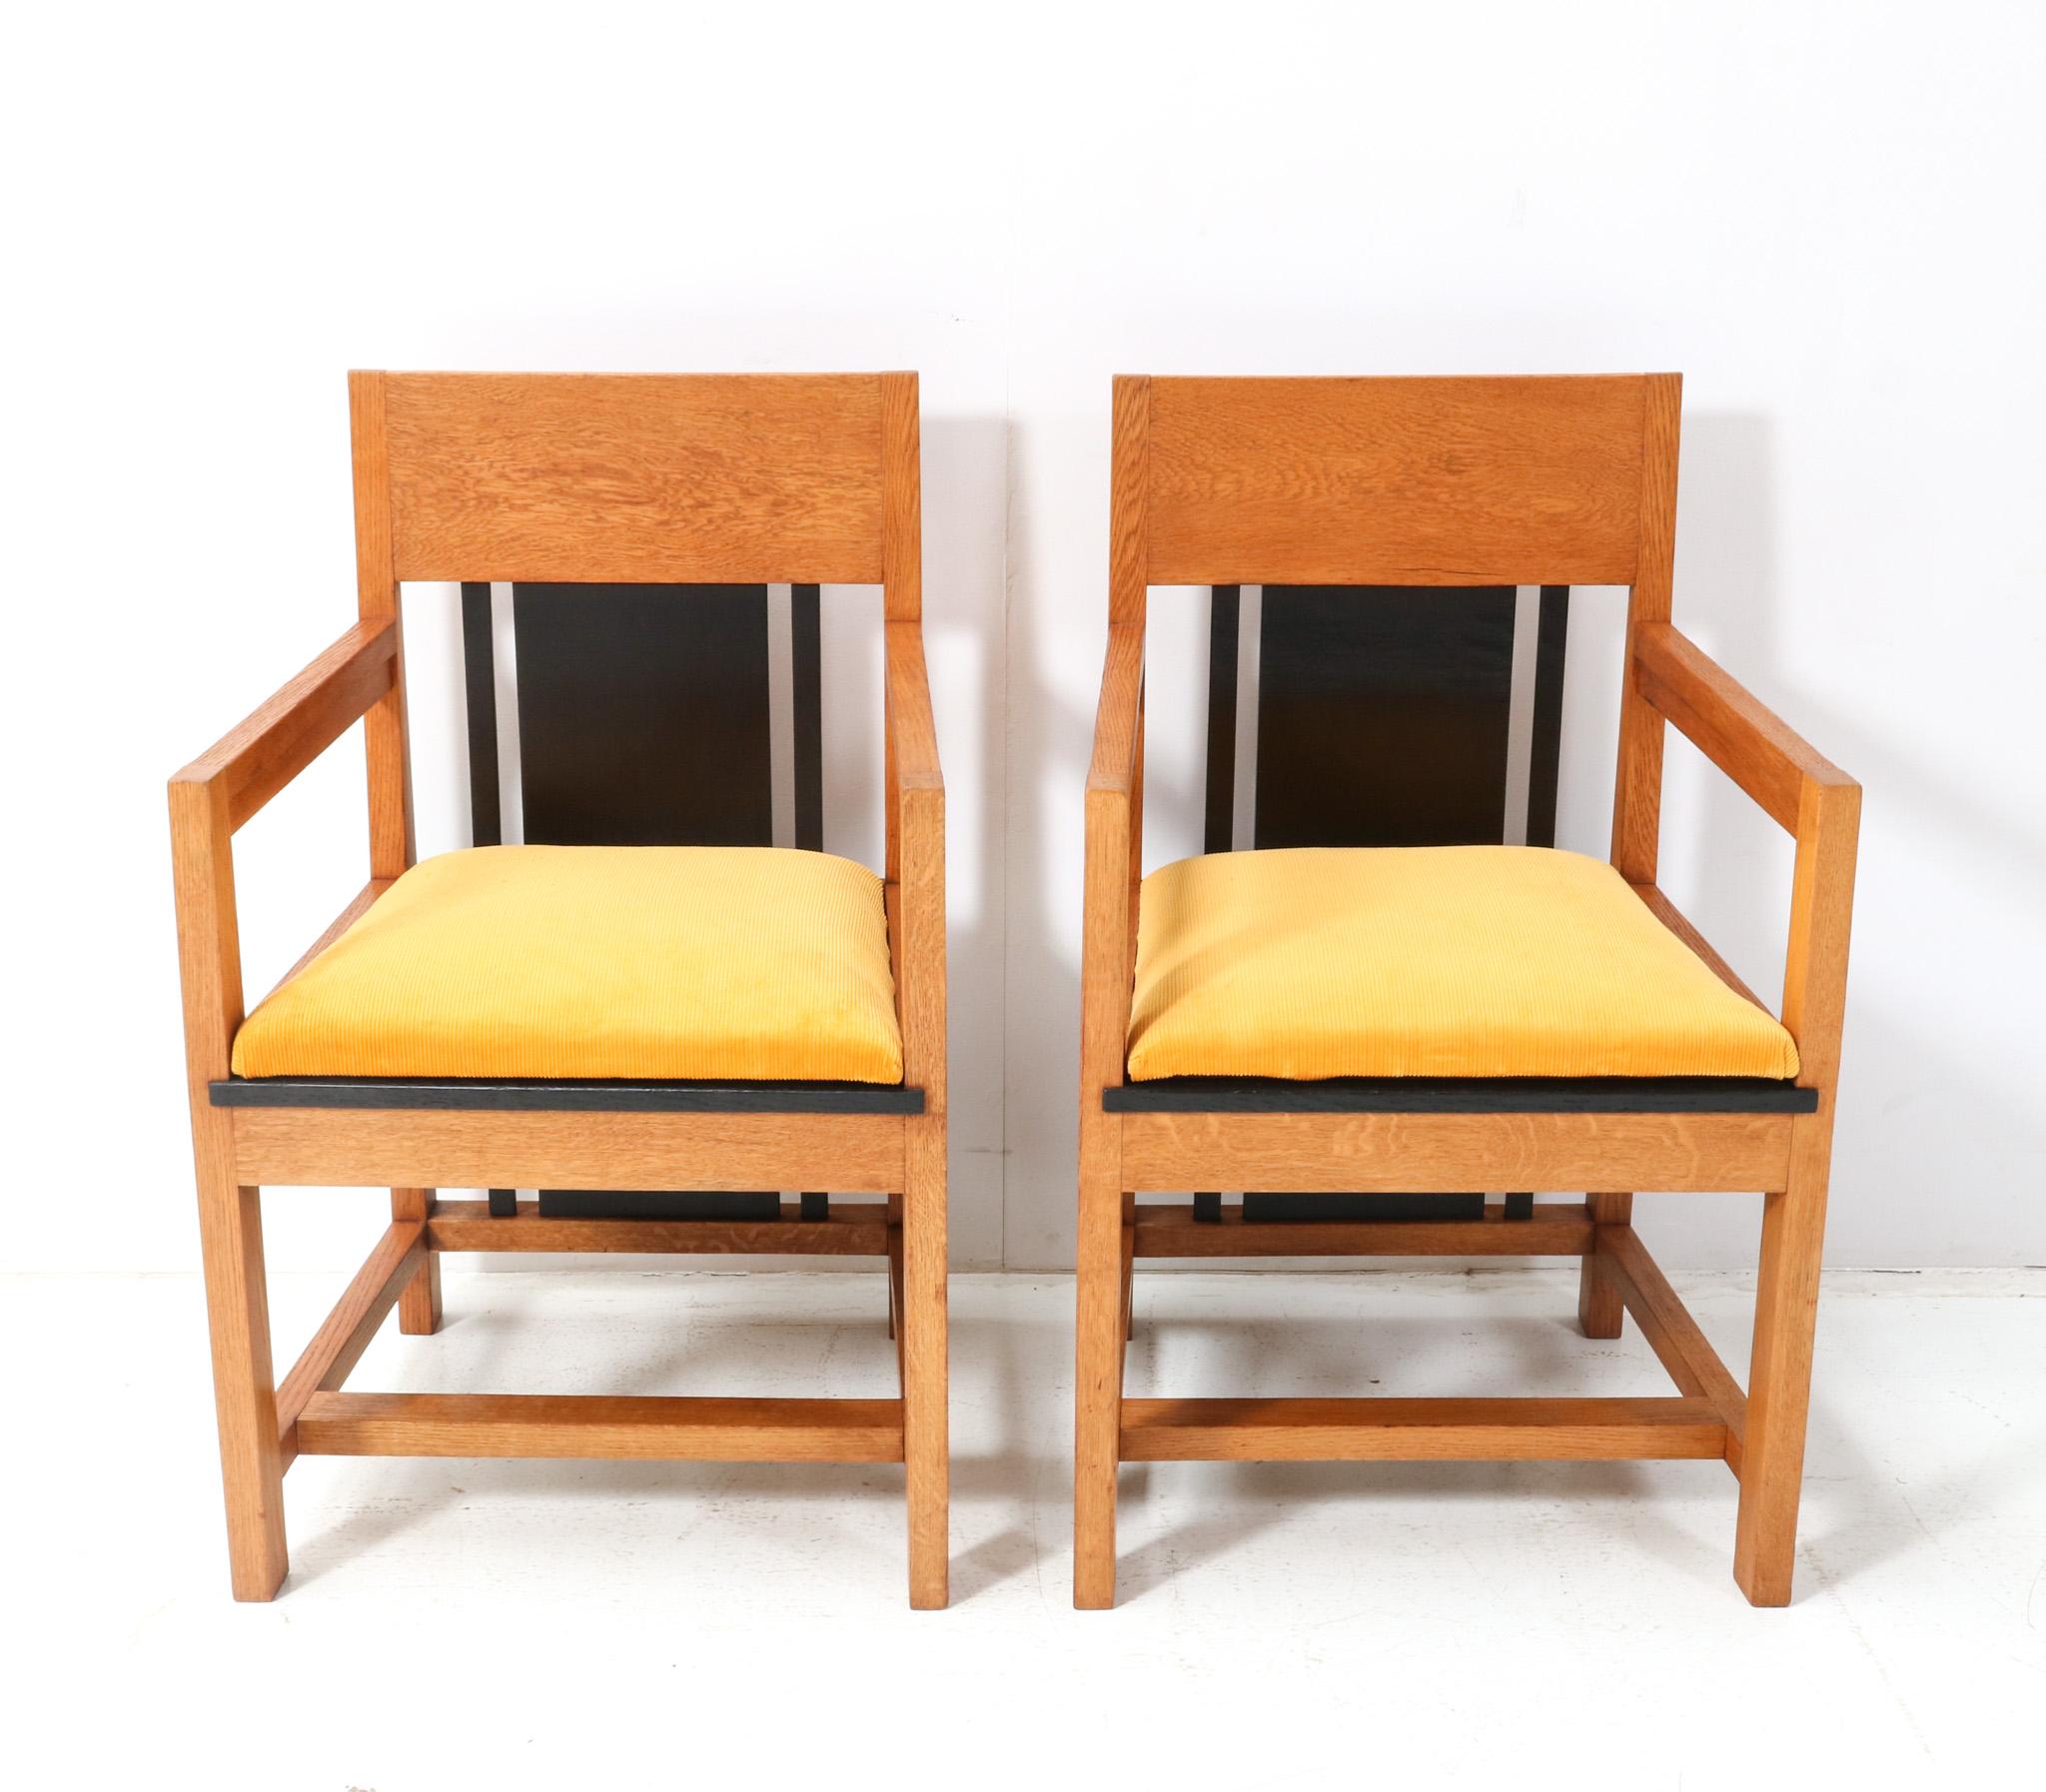 Magnificent and ultra rare pair of Art Deco Modernist high back armchairs. Design by Cor Alons and executed by Fa. Winterkamp & Van Putten in 1927. Striking Dutch design from the 1920s. Solid oak and black lacquered base with original black